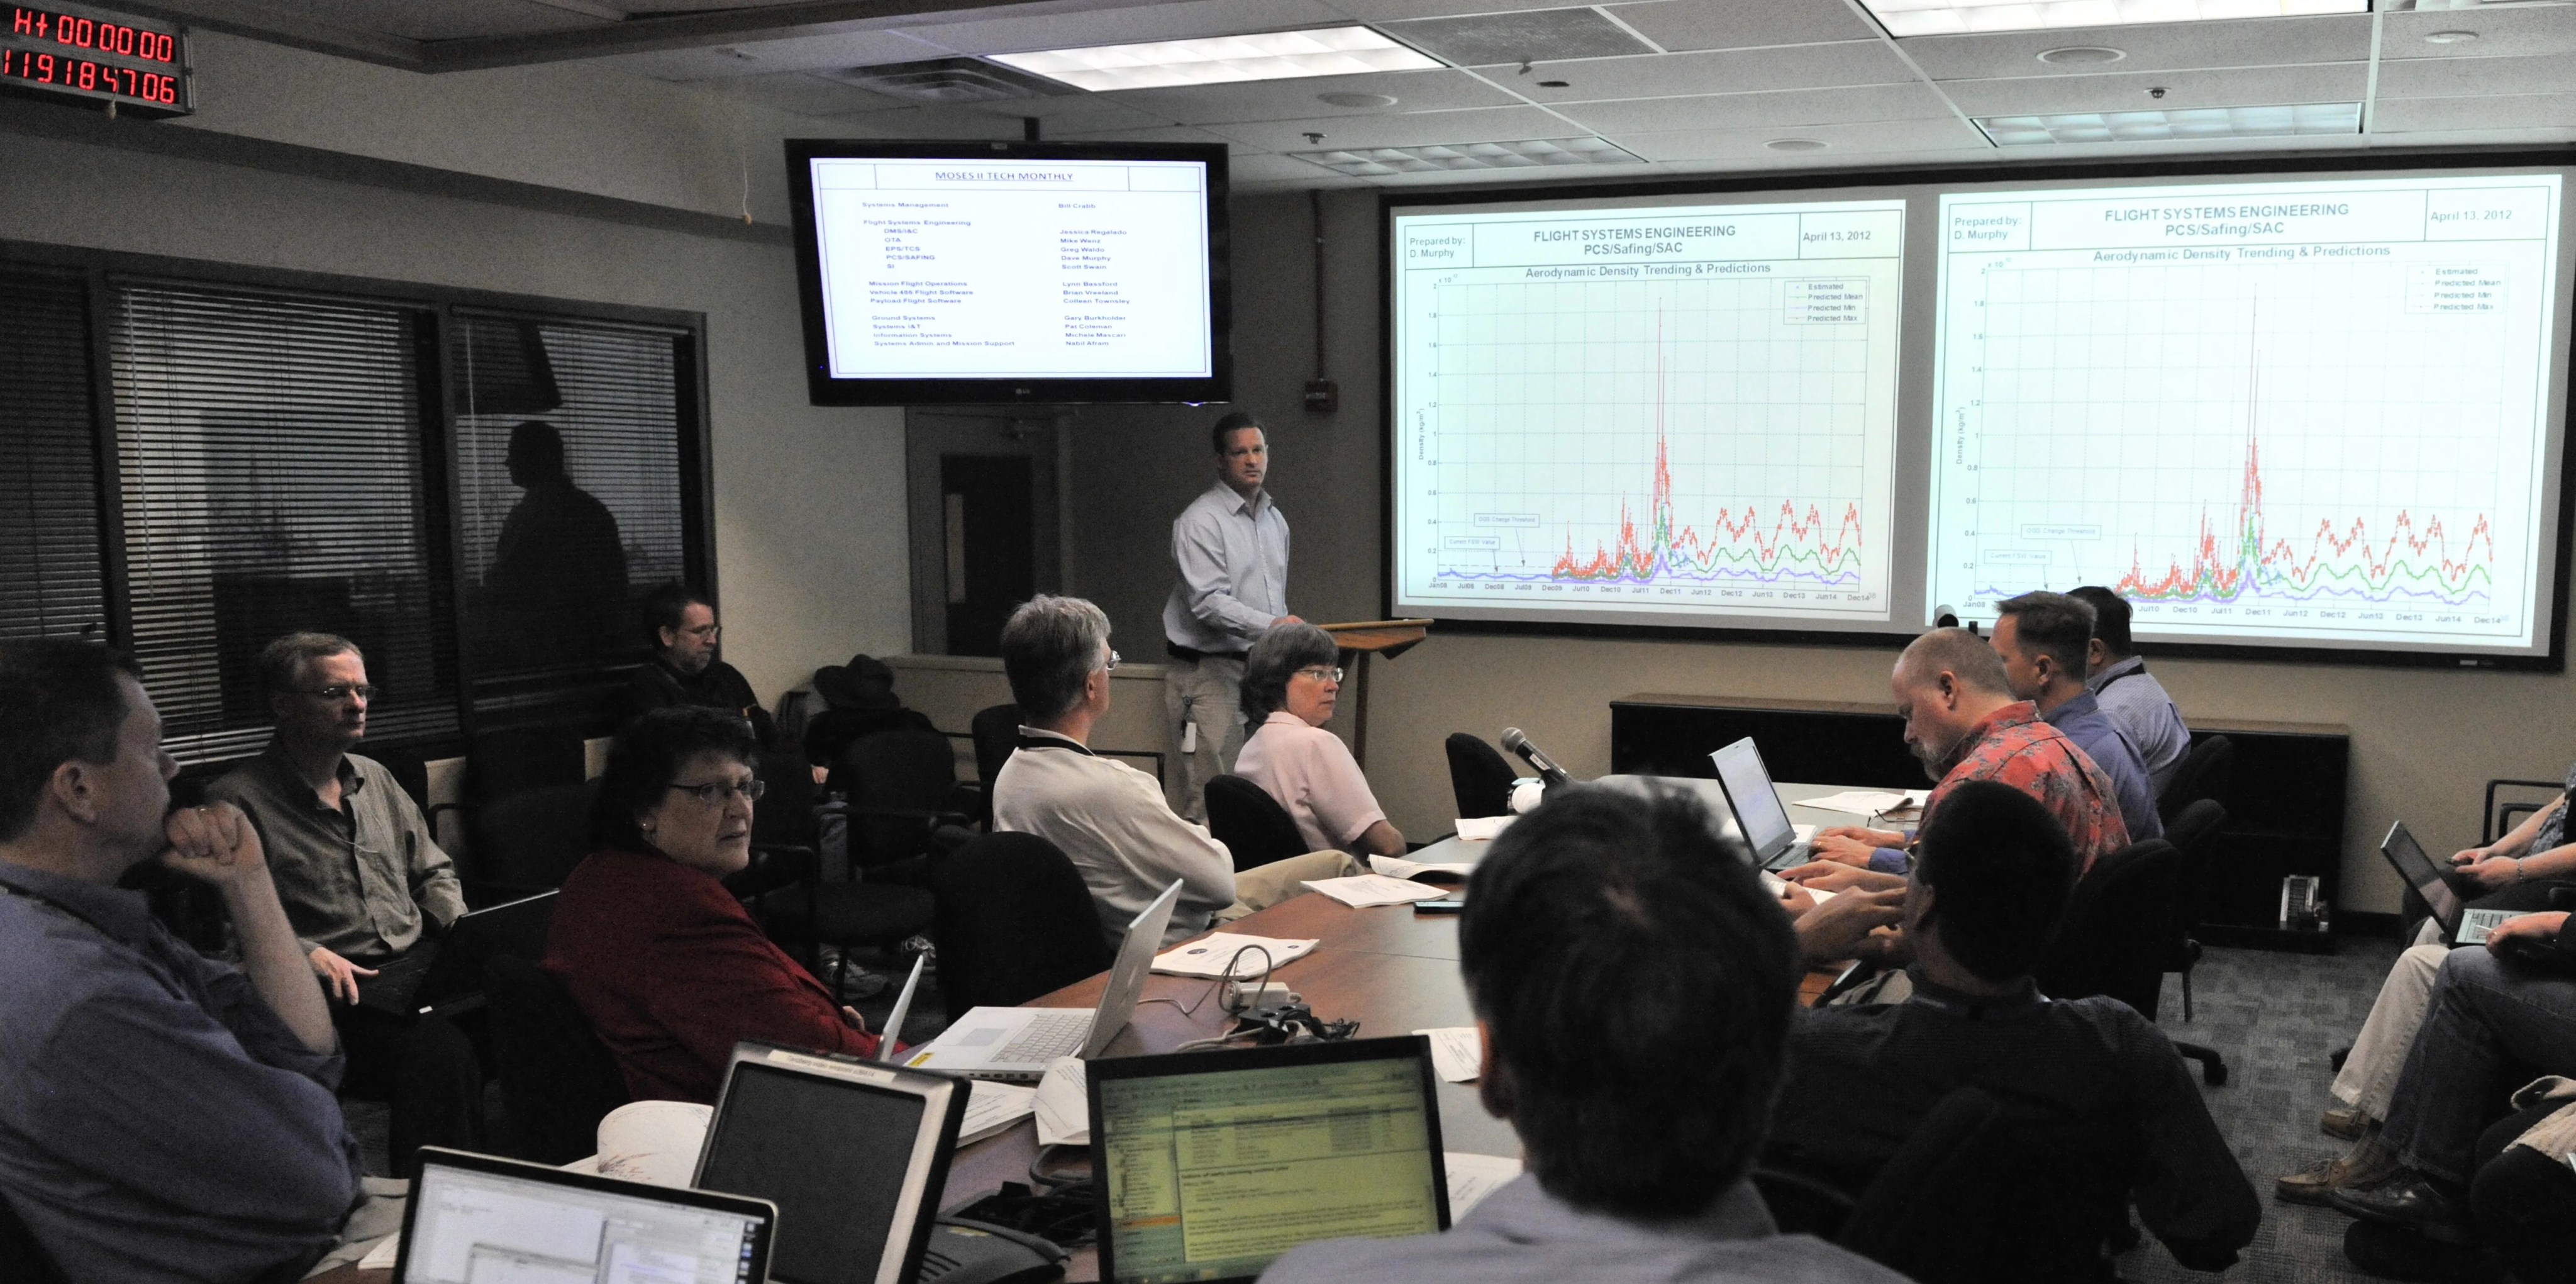 In the background in a conference room, a man presents two charts on the screen at the front of the room for the meeting. In the foreground, men and women sit at a conference table with their laptops, listening to the man present.